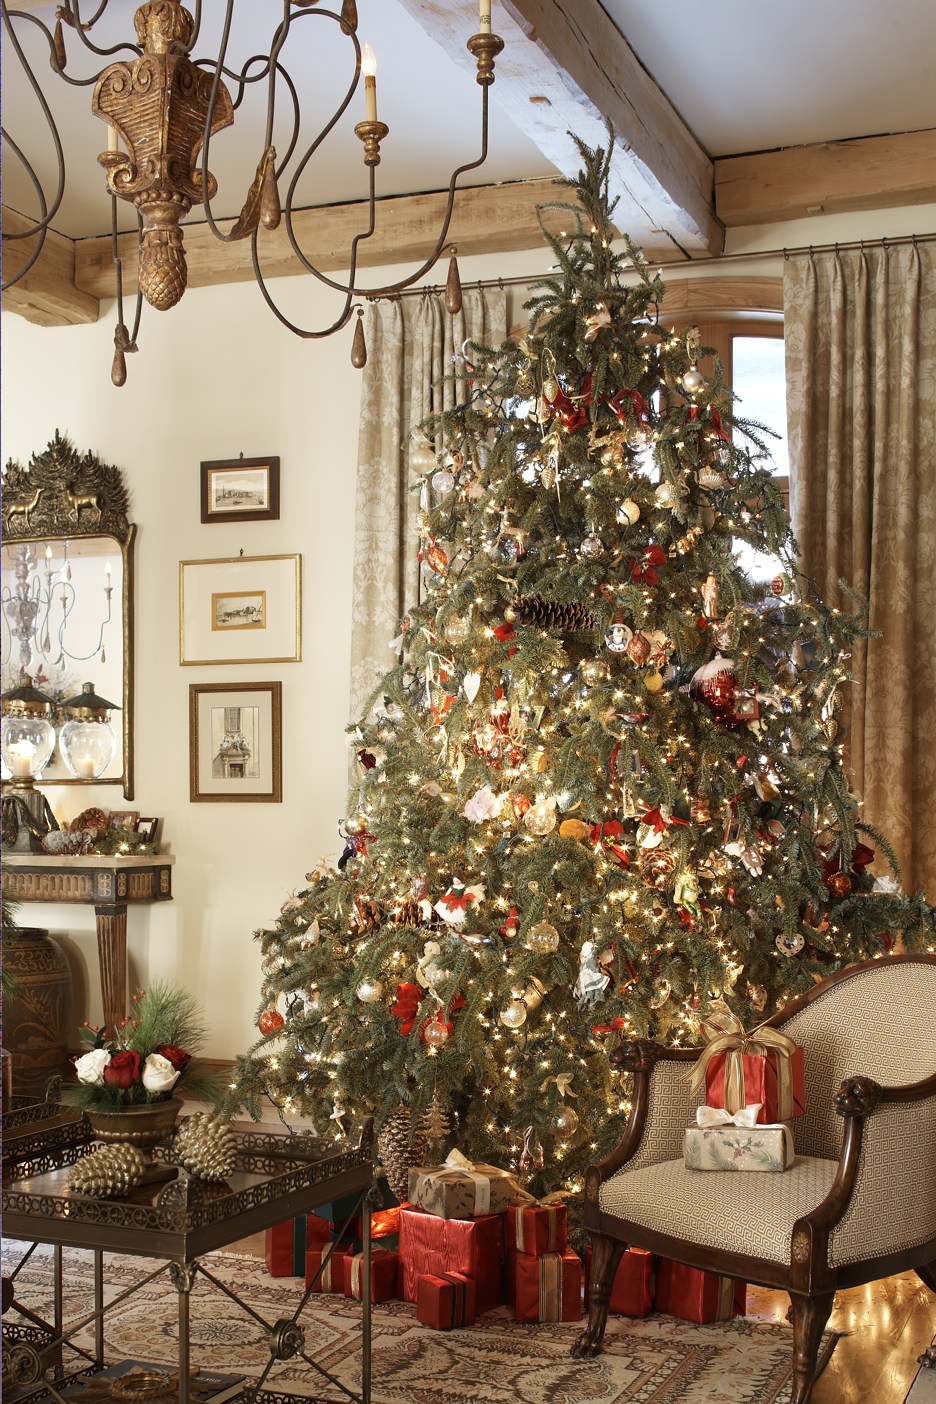 50 Christmas Decorations For Home You Can Do This Year  Decoration Love